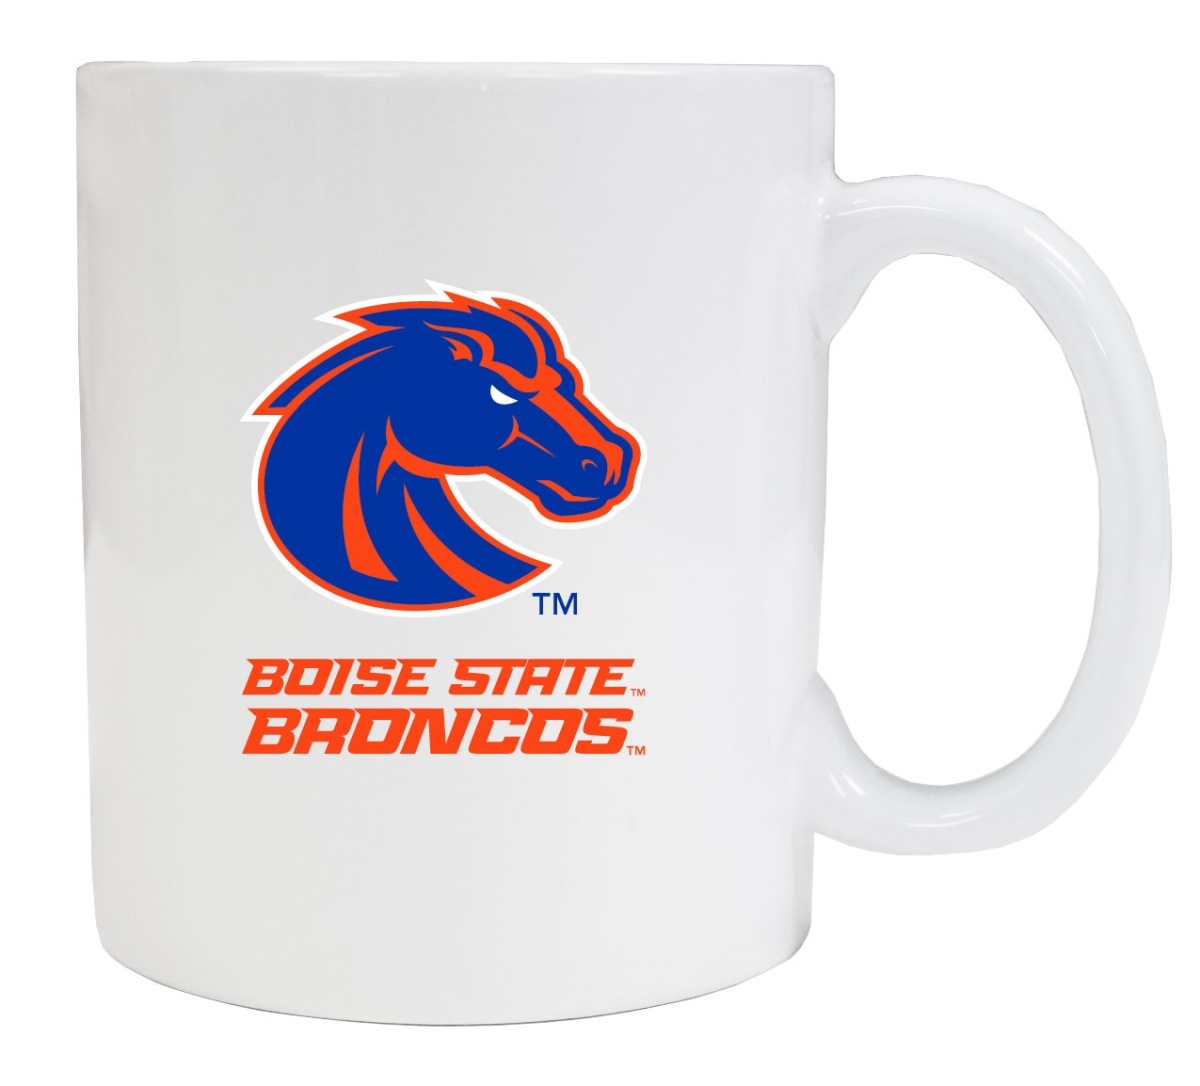 Picture of R & R Imports MUG2-C-BST19 W Boise State Broncos White Ceramic Coffee Mug - Pack of 2